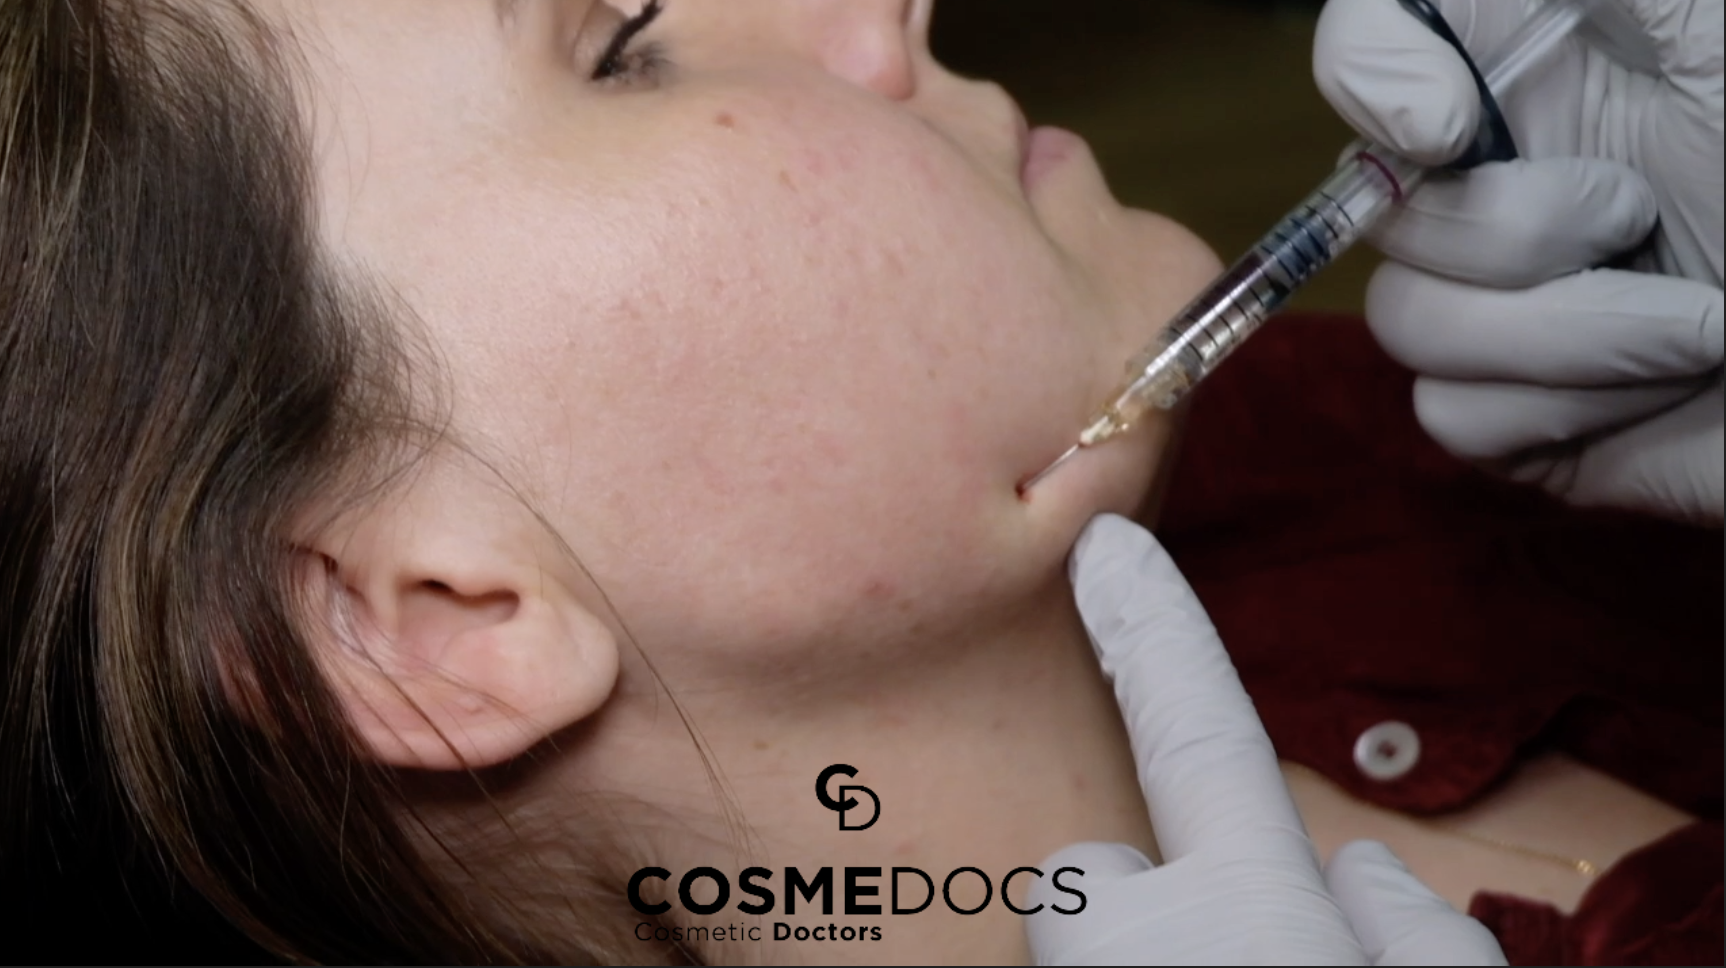 Procedure of applying jawline filler using a cannula technique for enhanced precision.